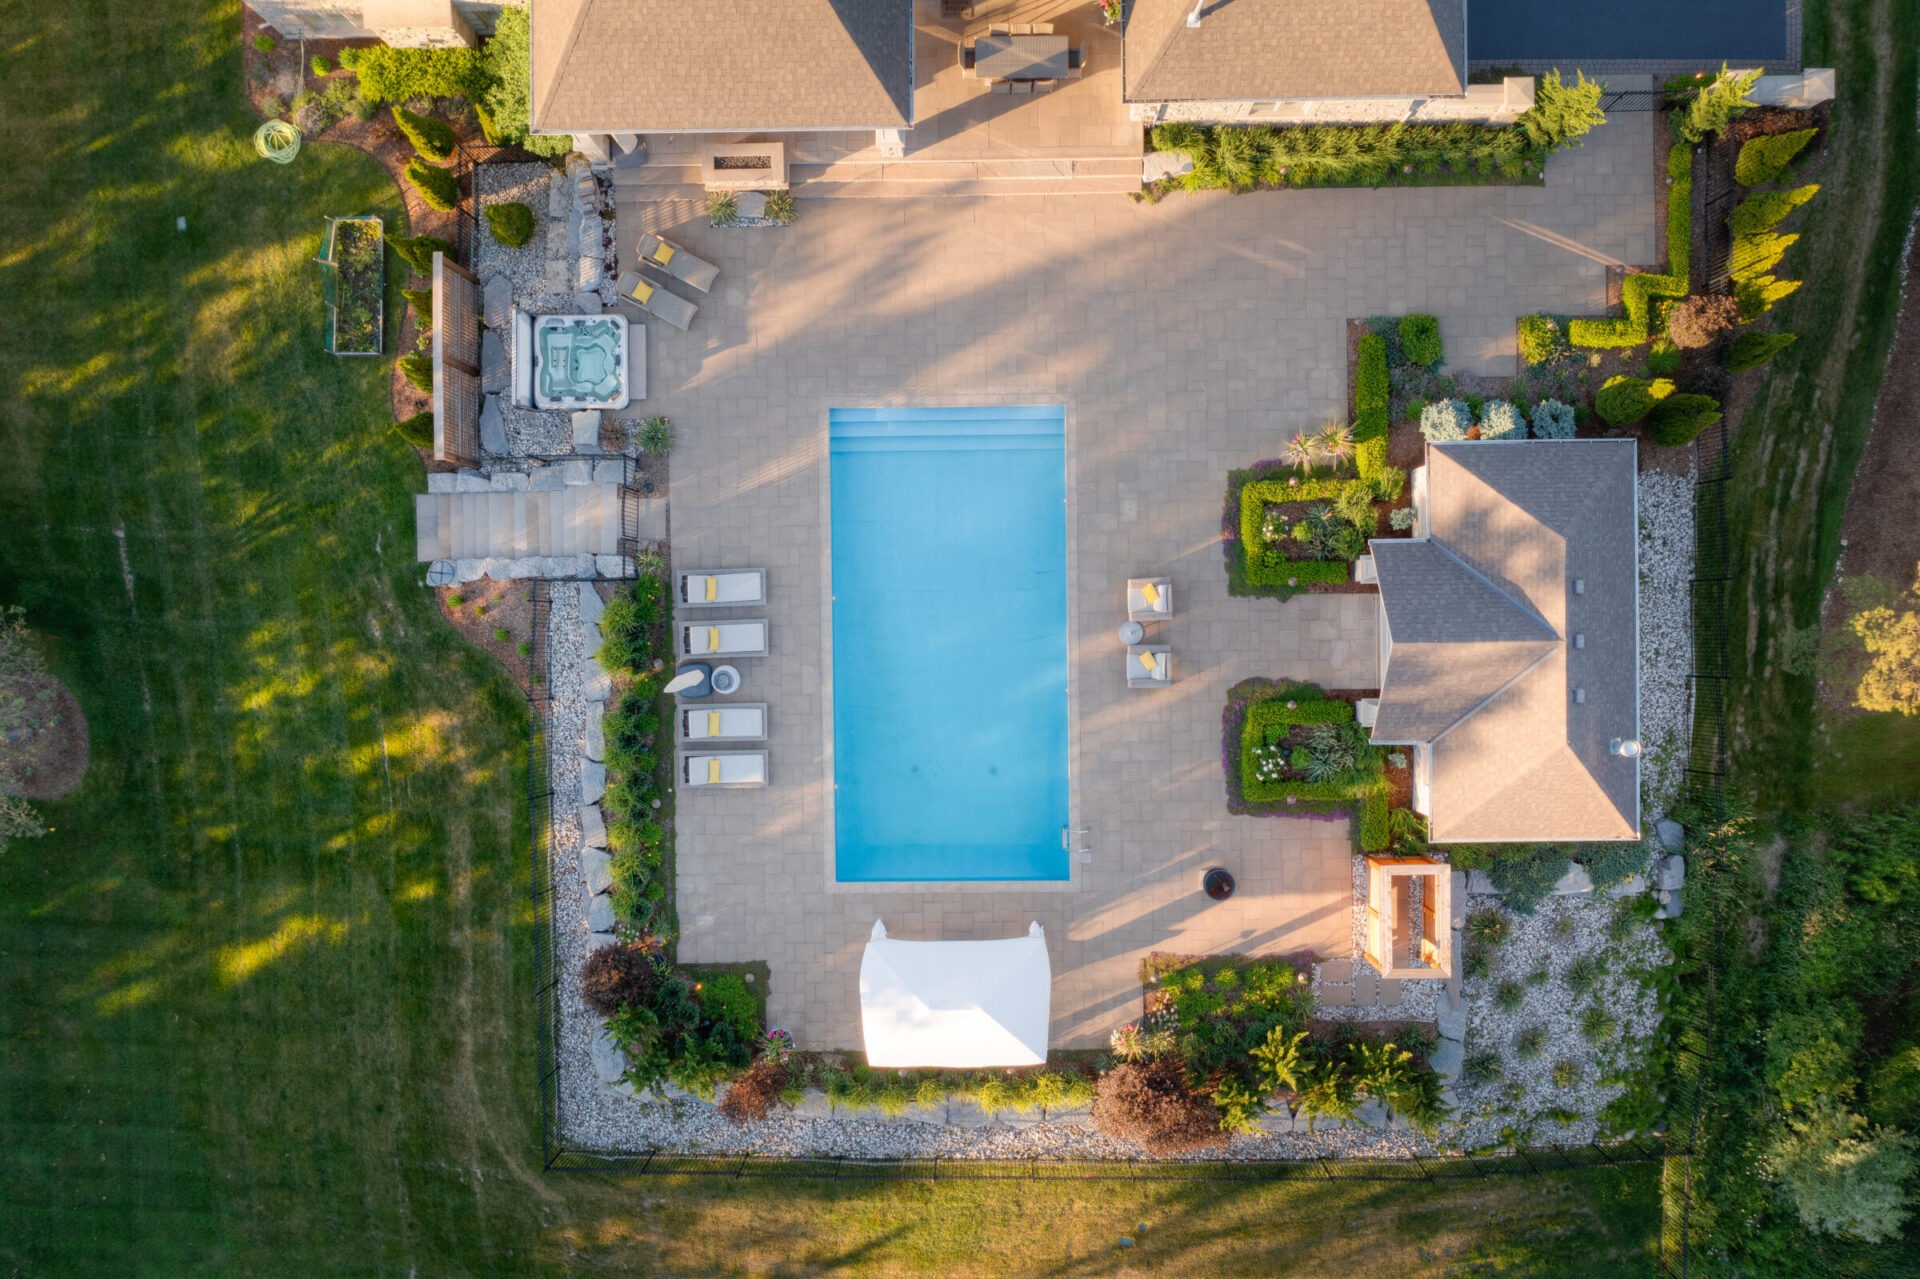 Aerial view of a luxury backyard with a large swimming pool, hot tub, landscaped garden, sun loungers, and a patio area during sunset.